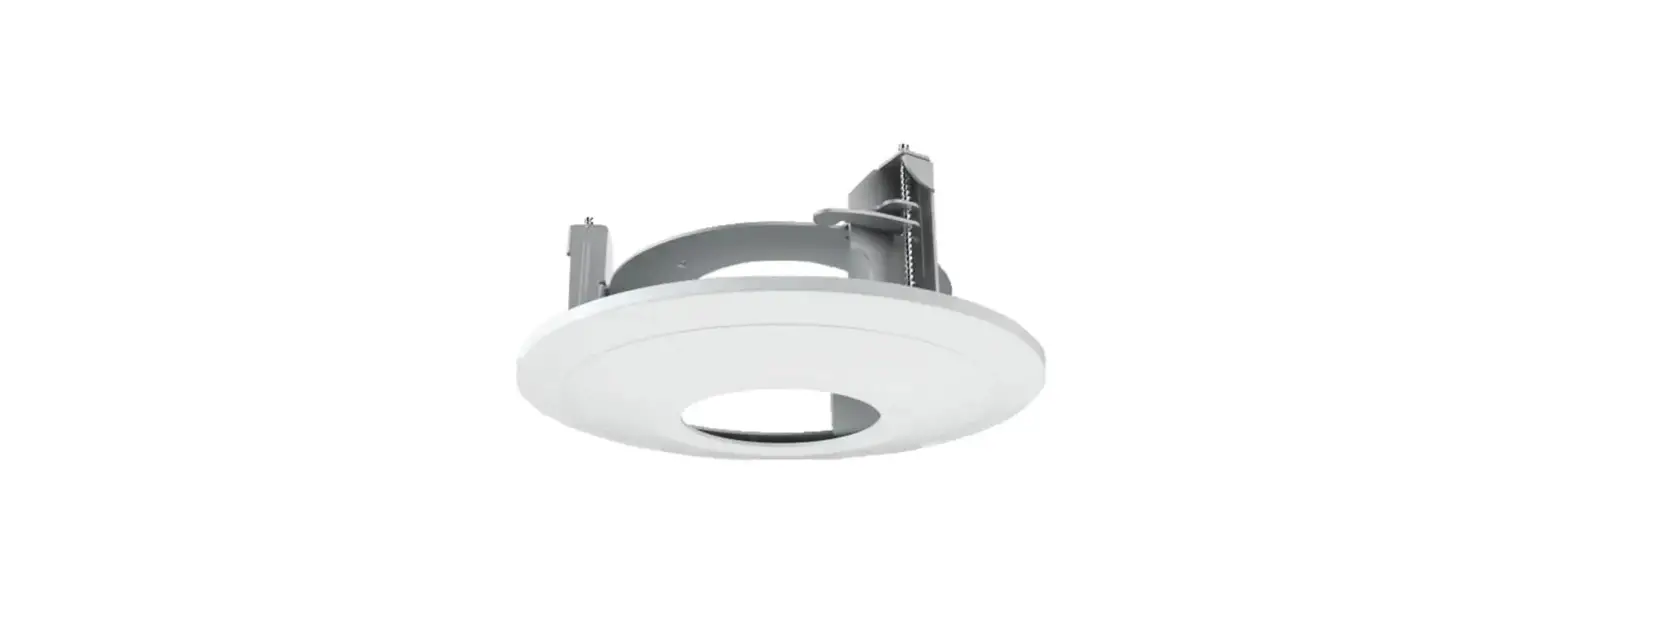 FMT1 In Ceiling Flush Mounting